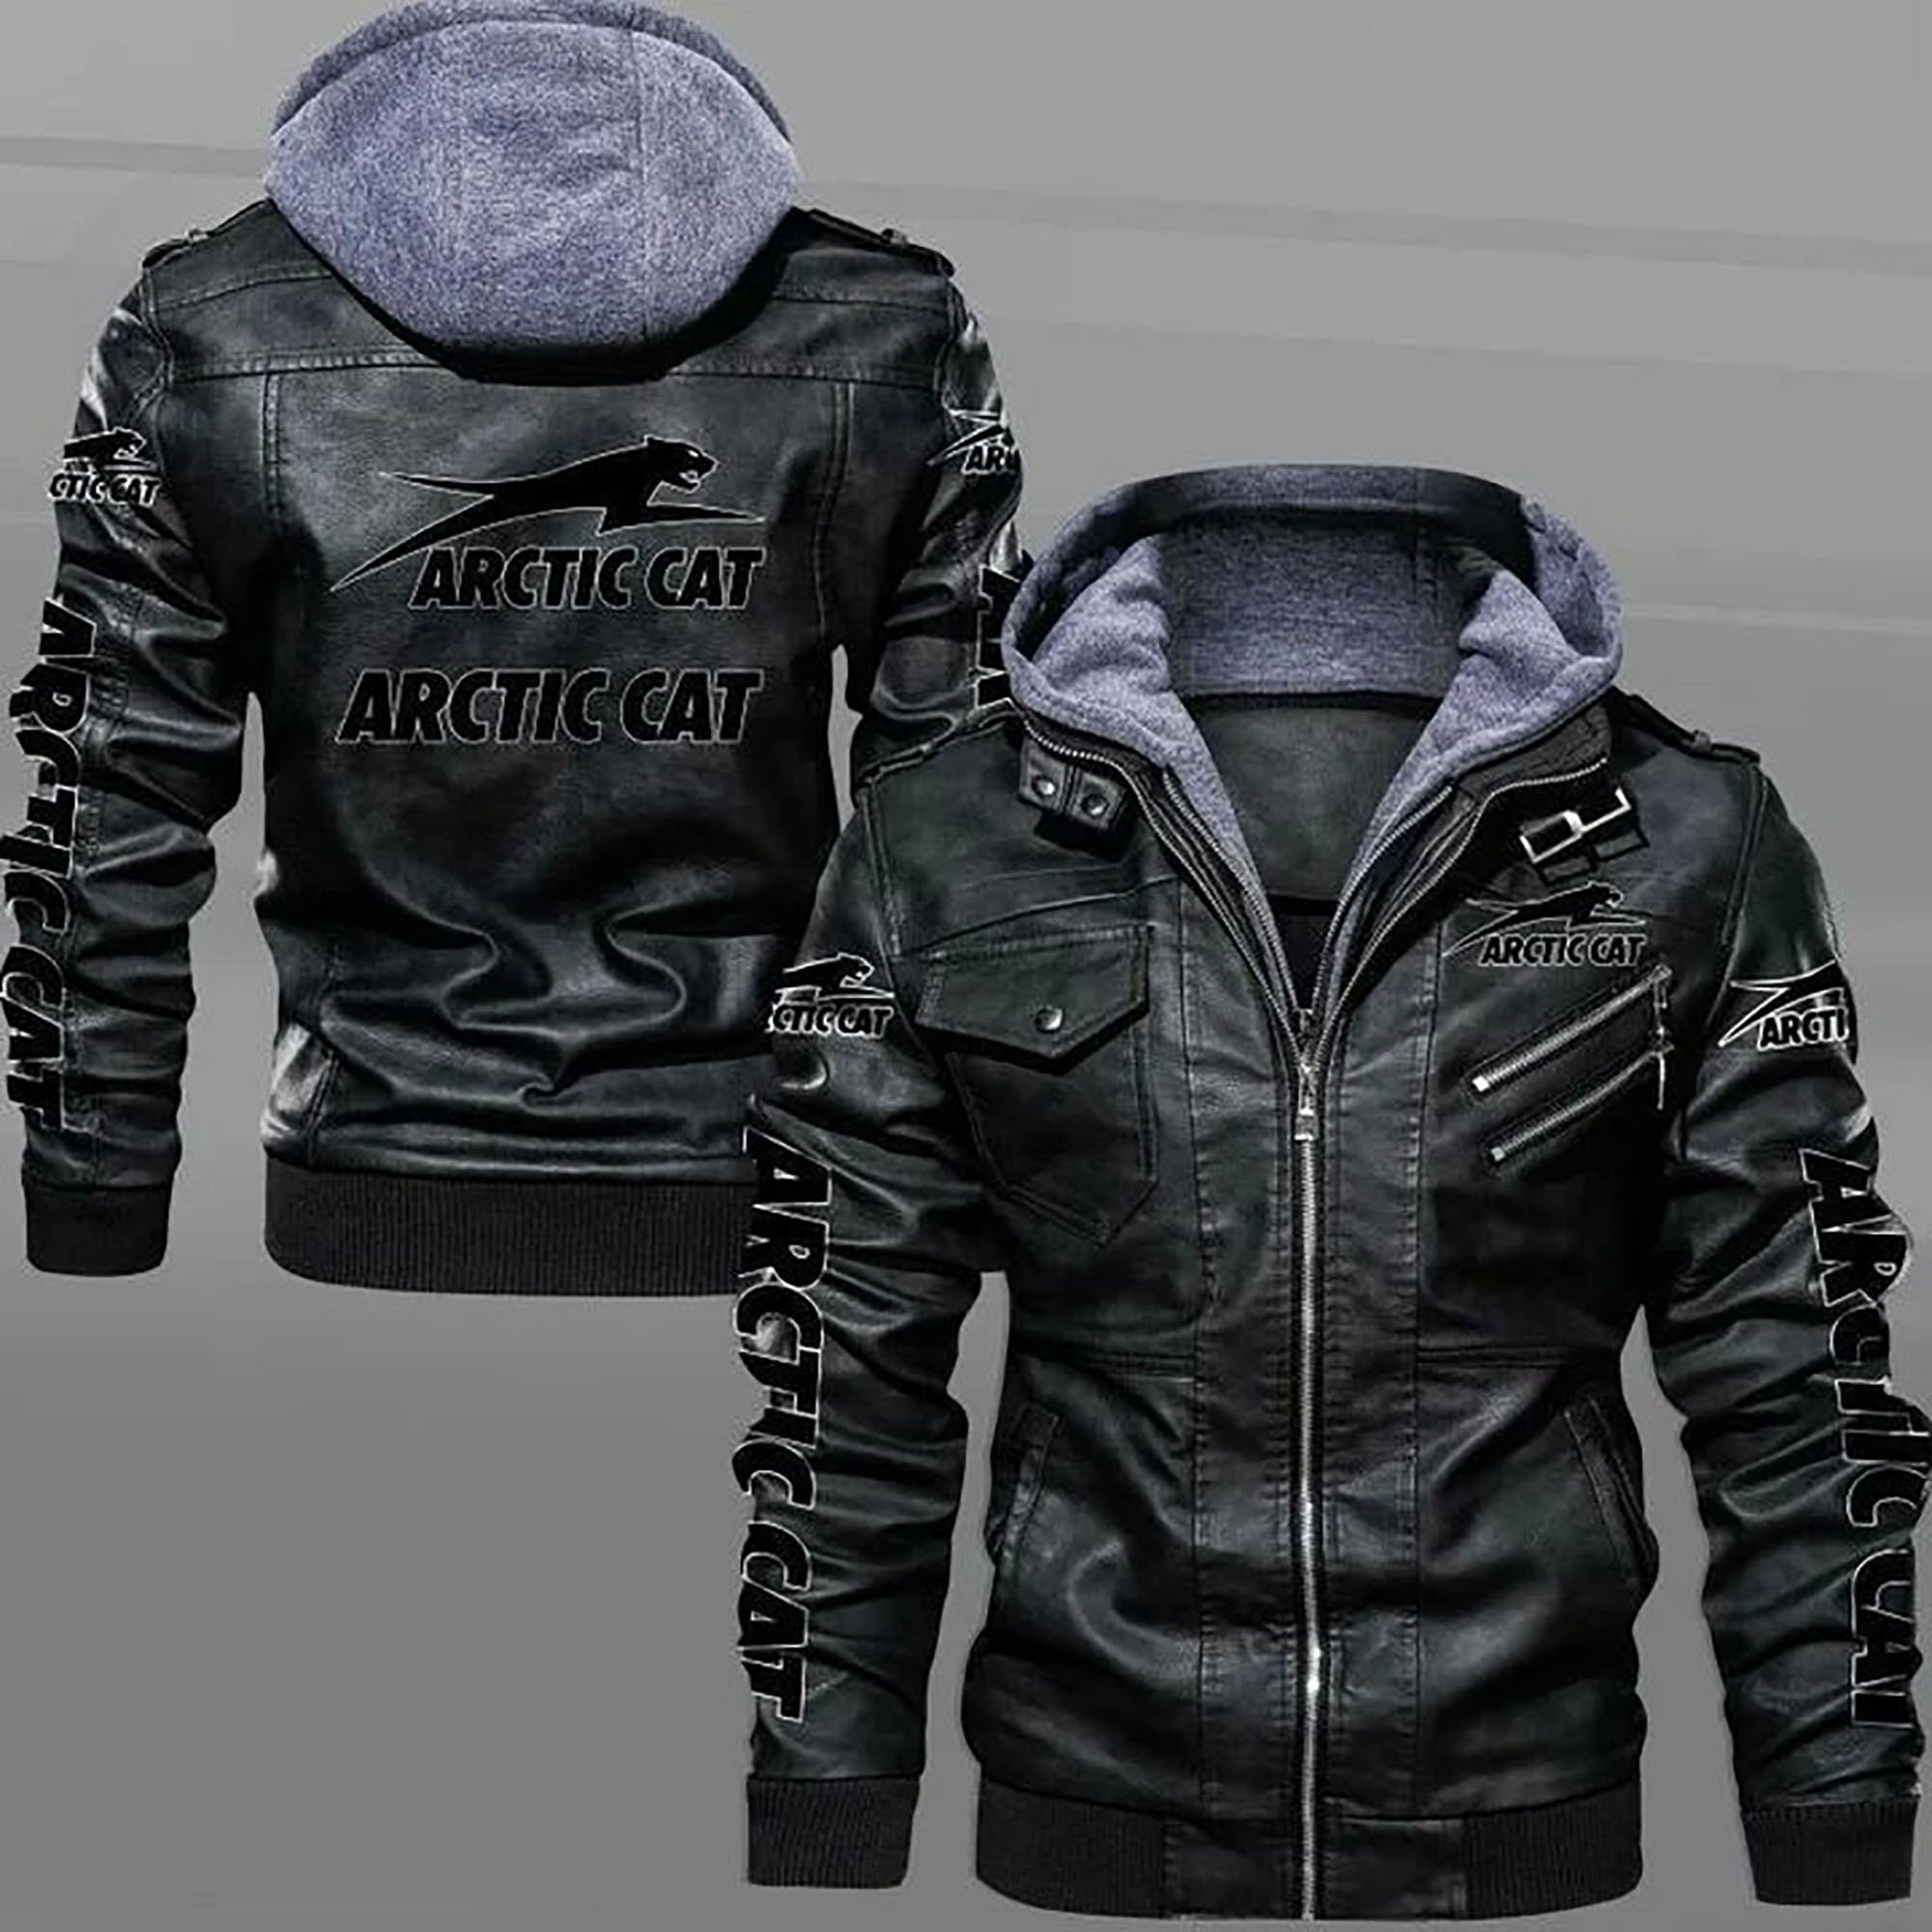 These Amazing Leather Jacket will add to the appeal of your outfit 218